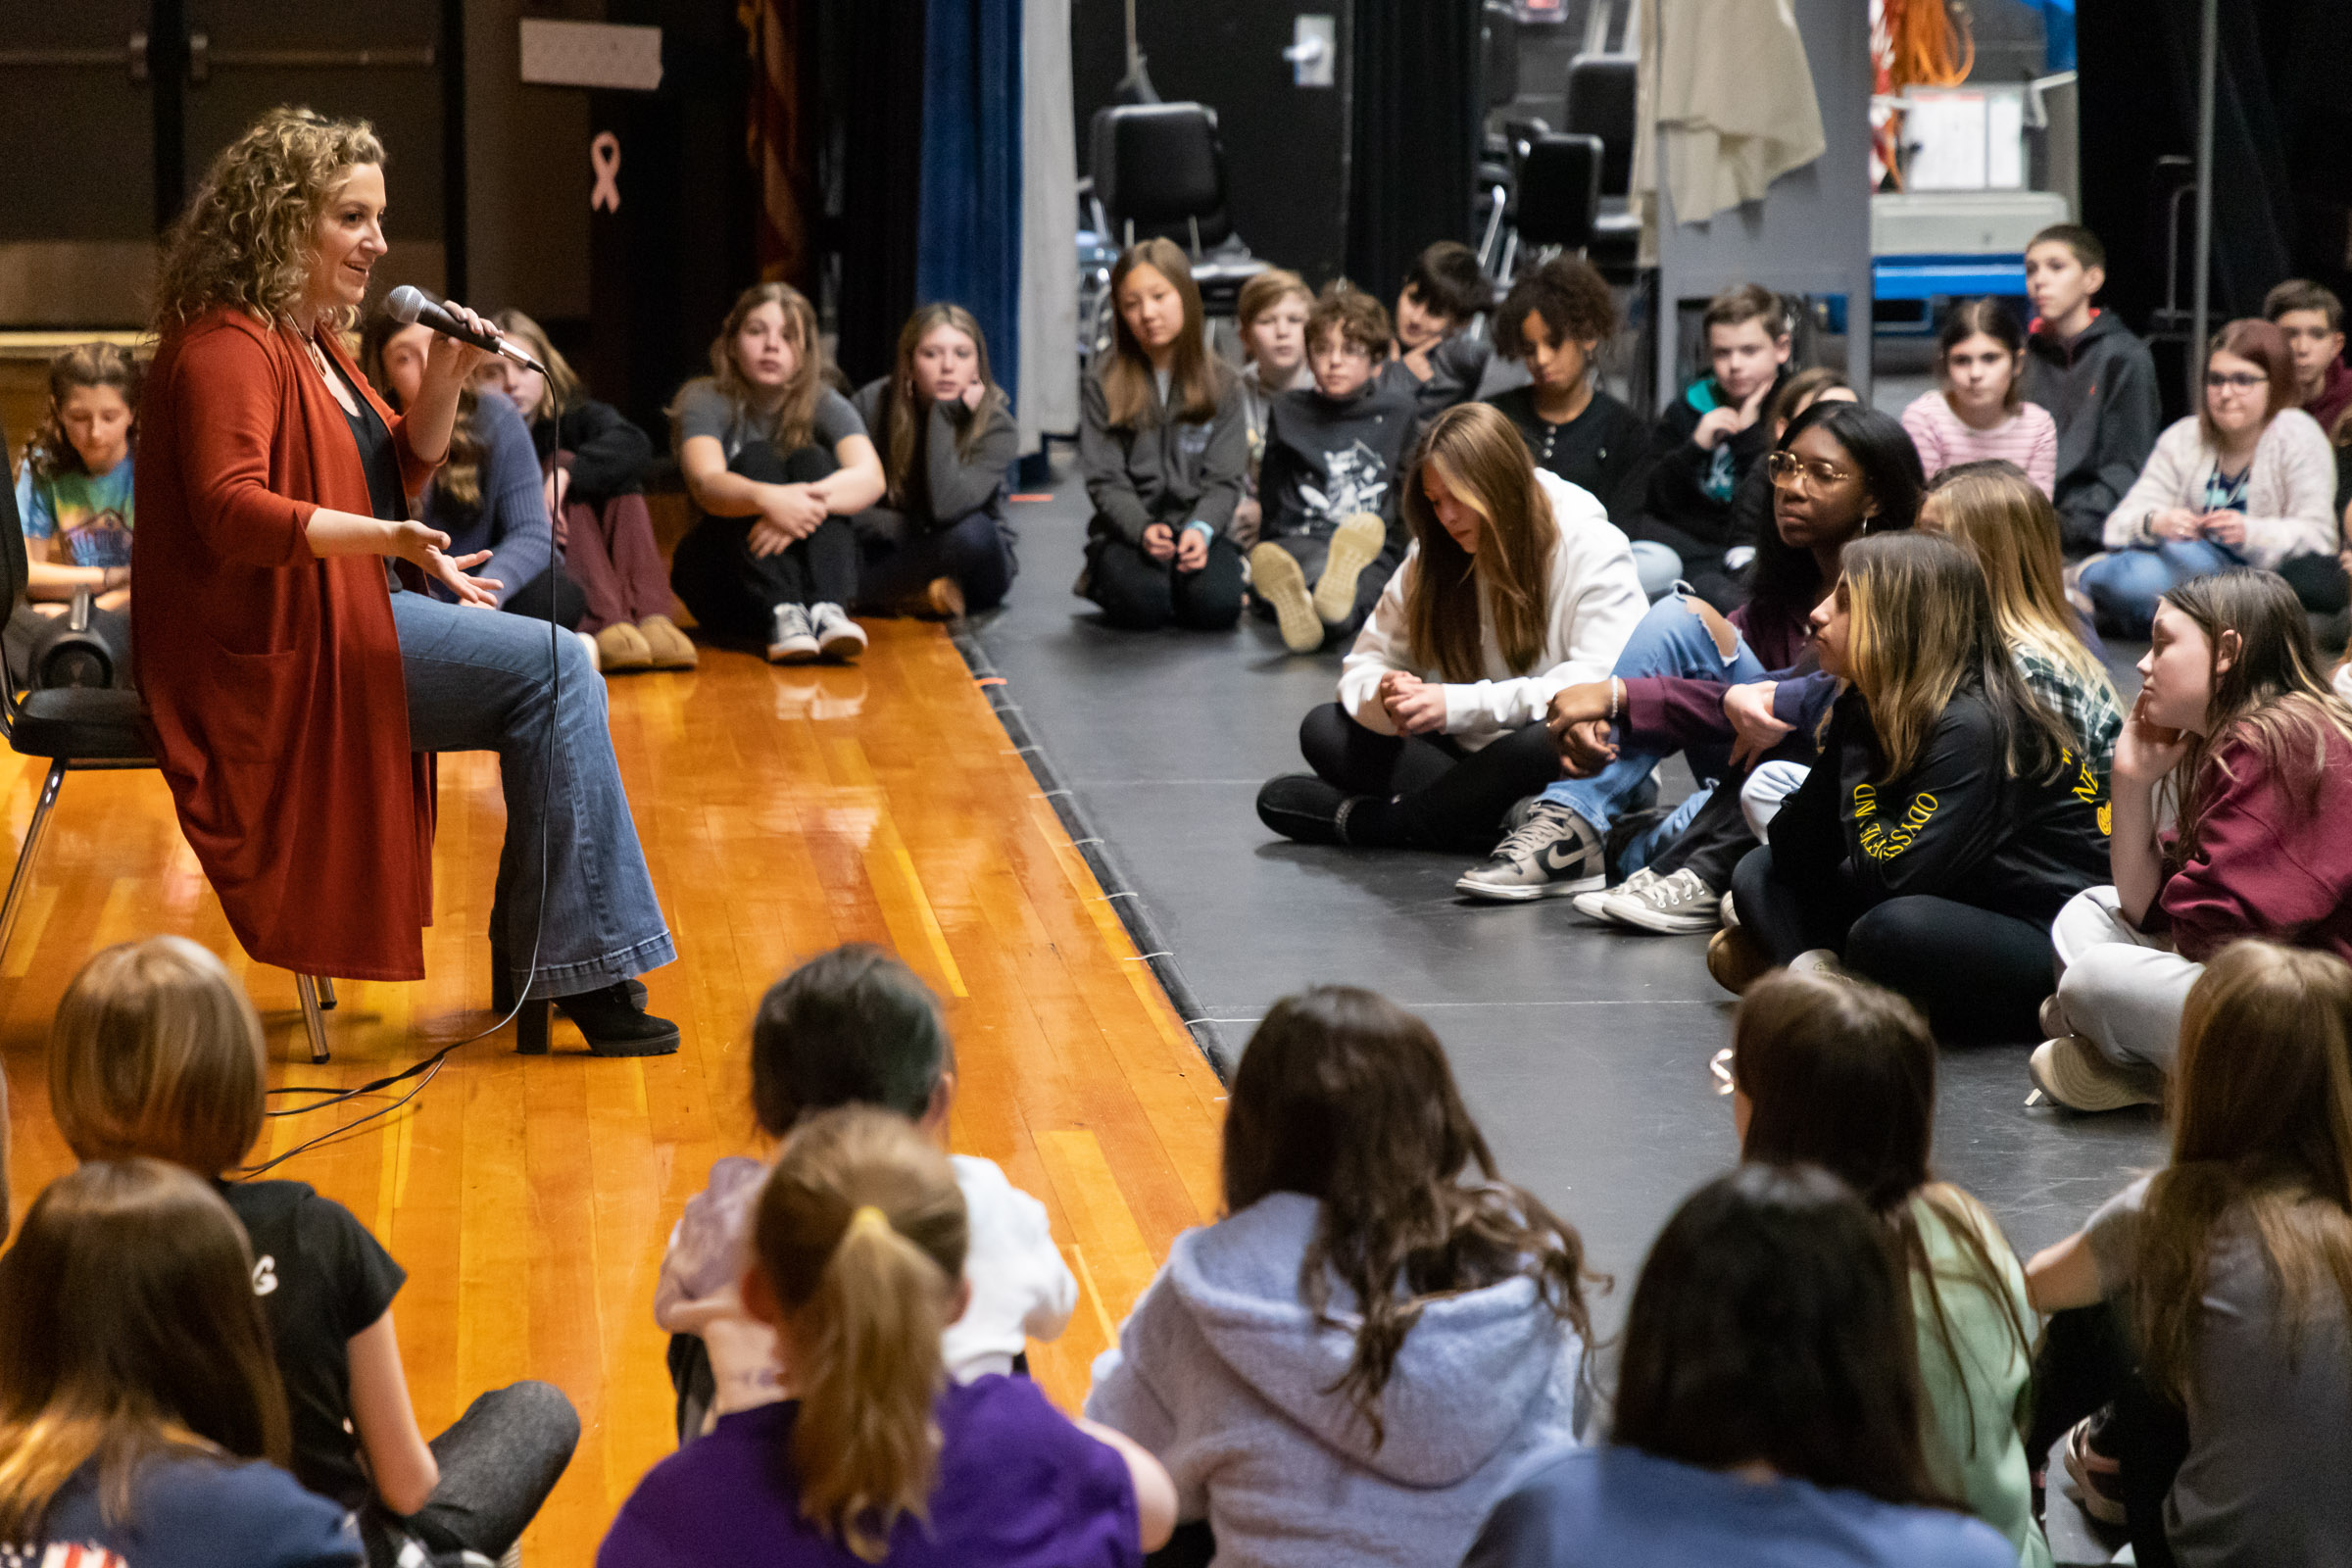 Broadway actress Donna Vivino holds a workshop for Warwick Valley Middle School Drama Club members in the high school auditorium on Feb. 27, 2023.